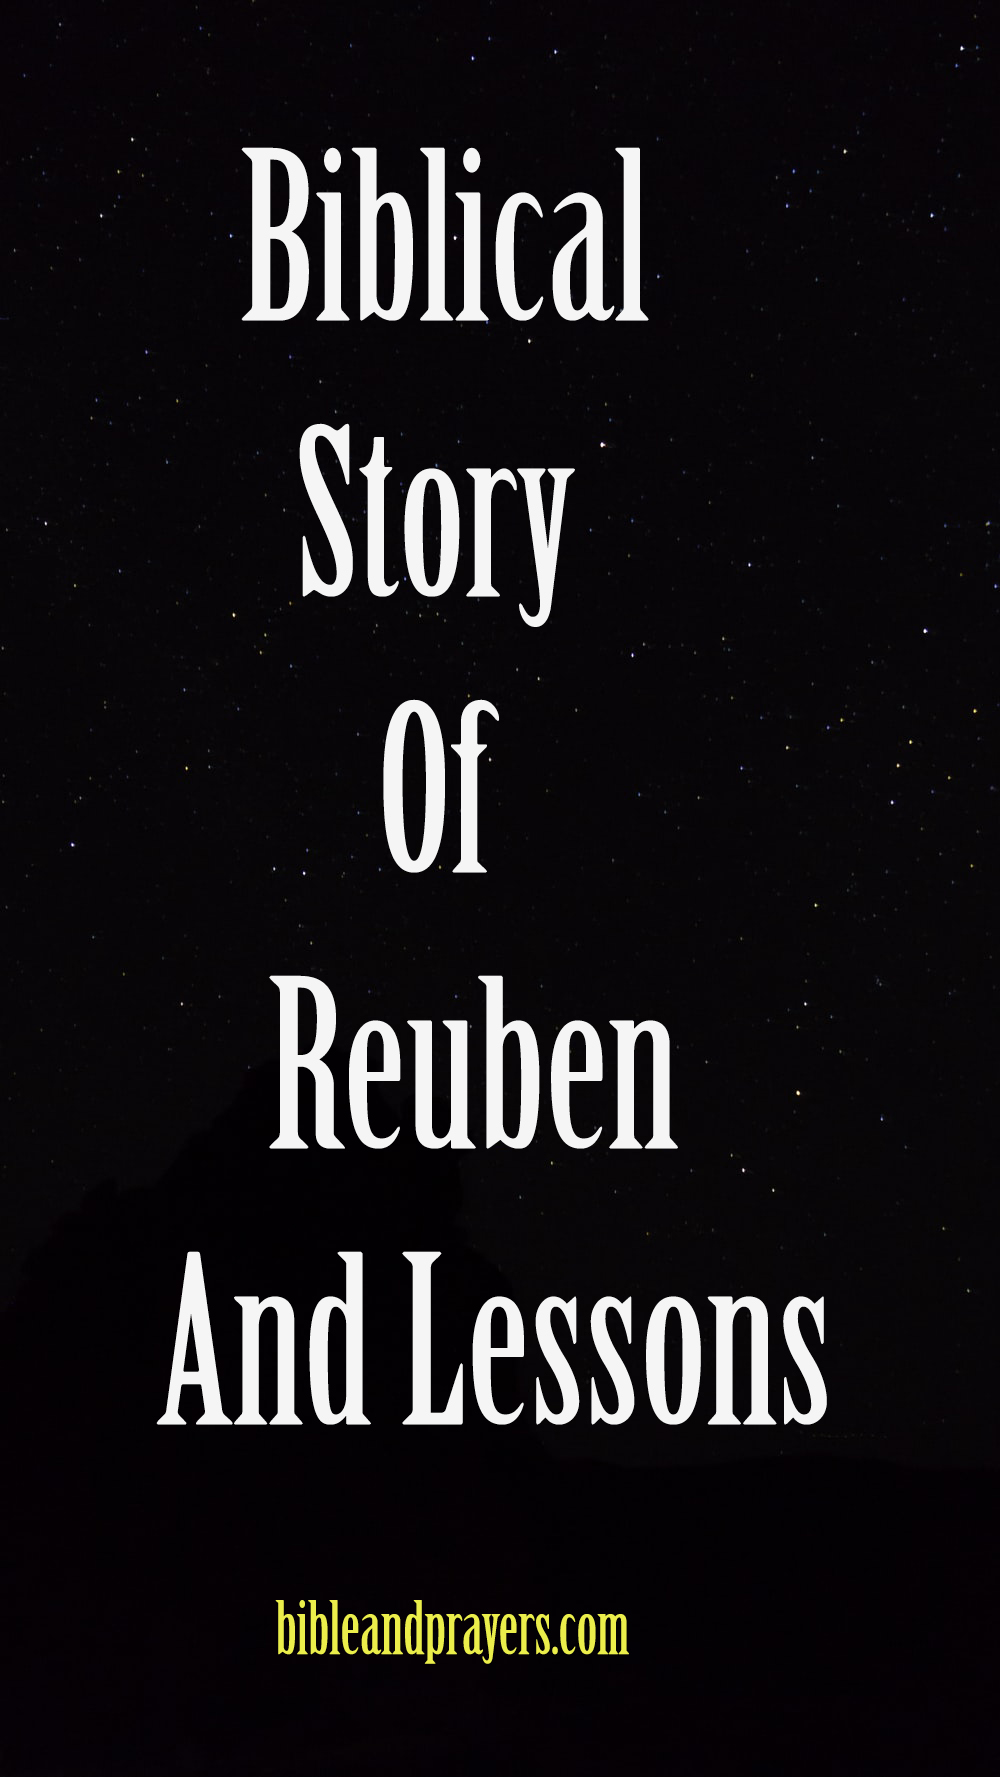 Biblical Story Of Reuben And Lessons